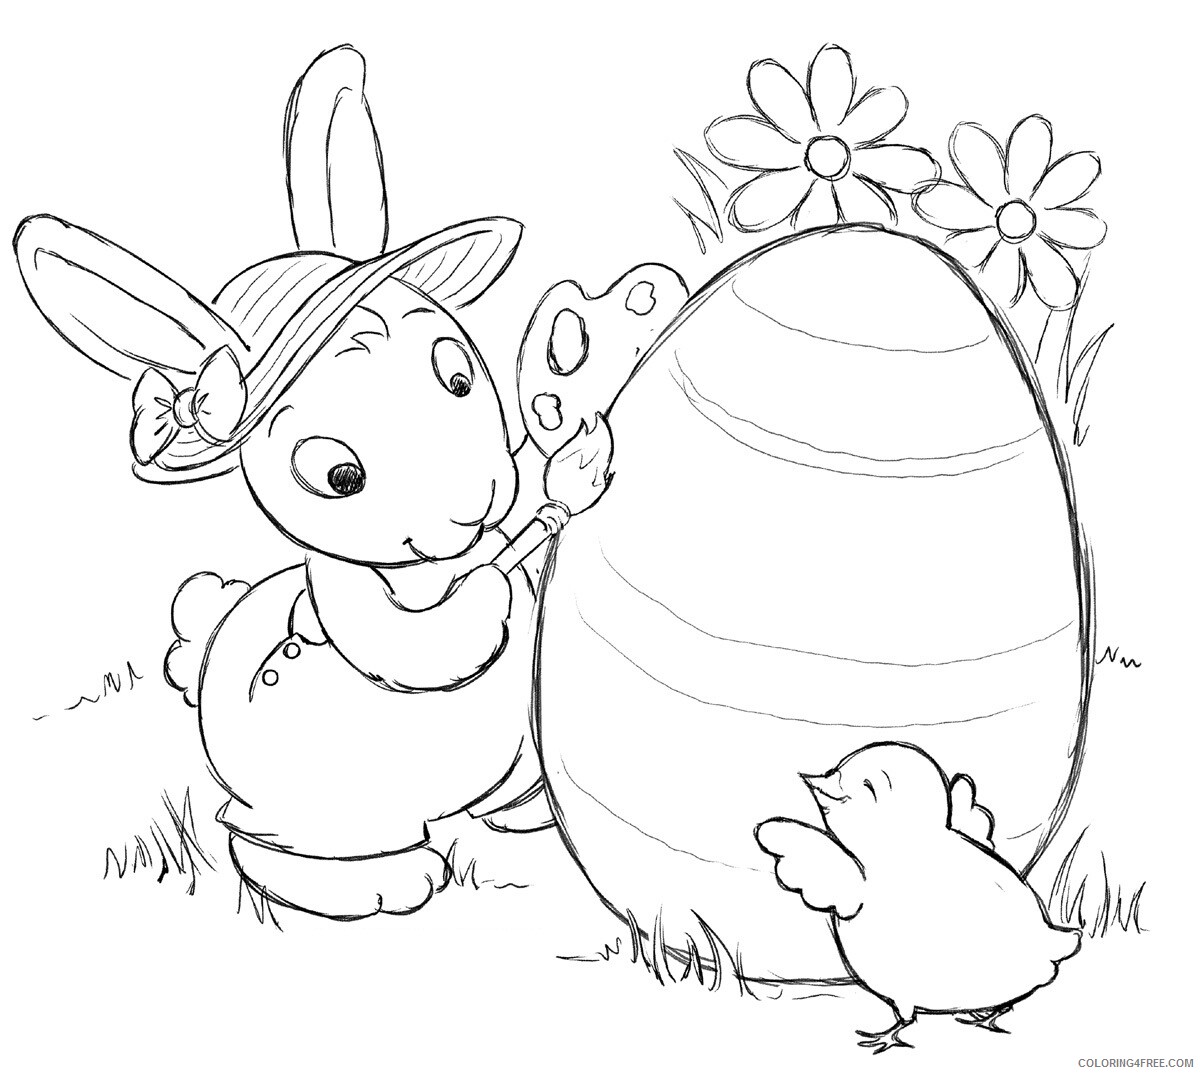 Easter Bunny Coloring Pages Holiday of Easter Bunny Printable 2021 0404 Coloring4free